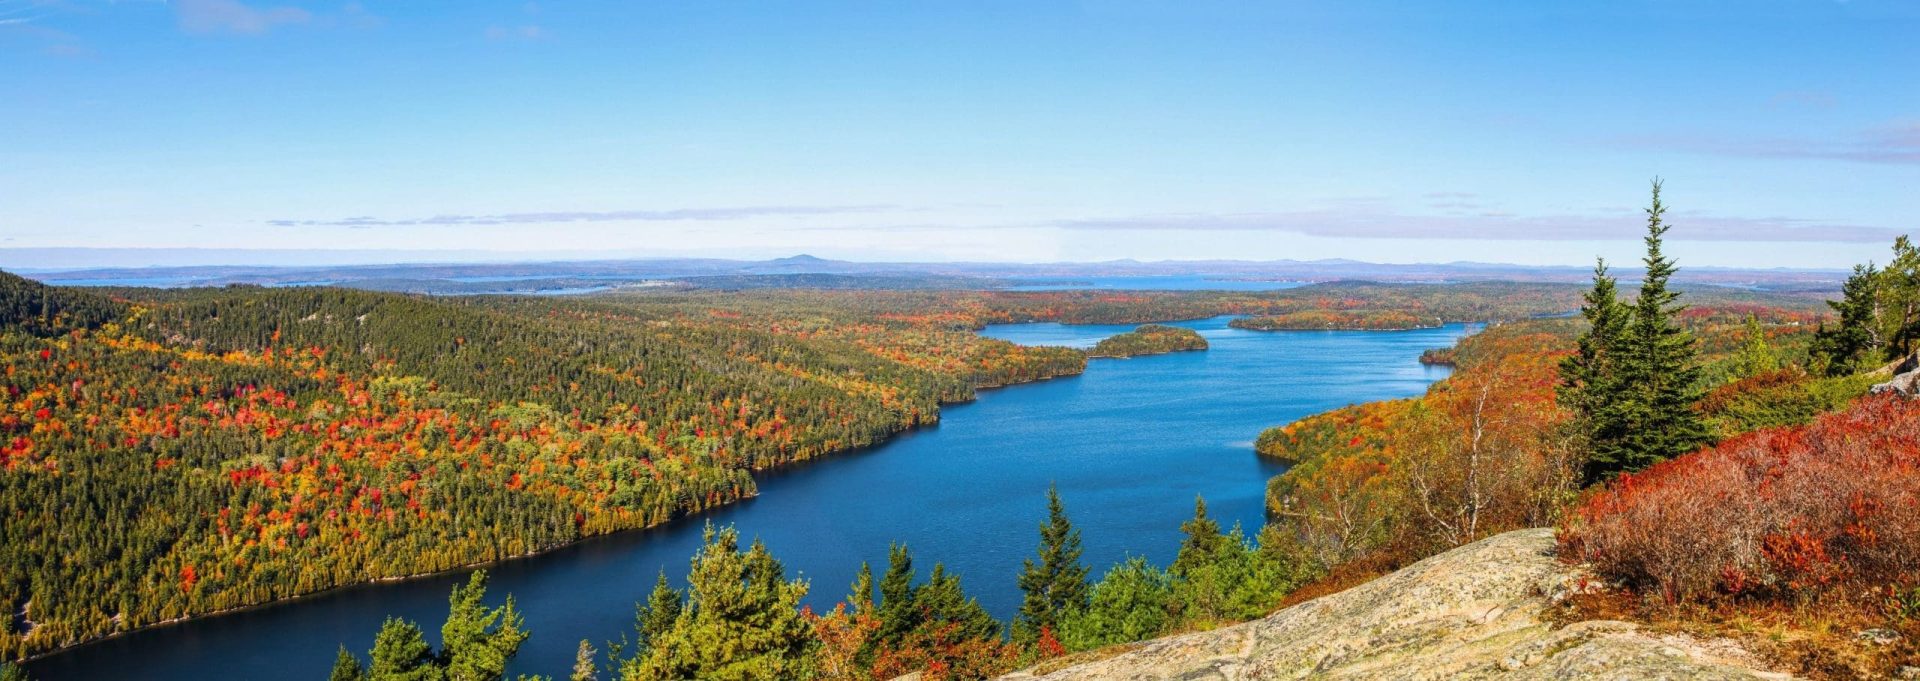 Is October a good time to visit Acadia National Park?